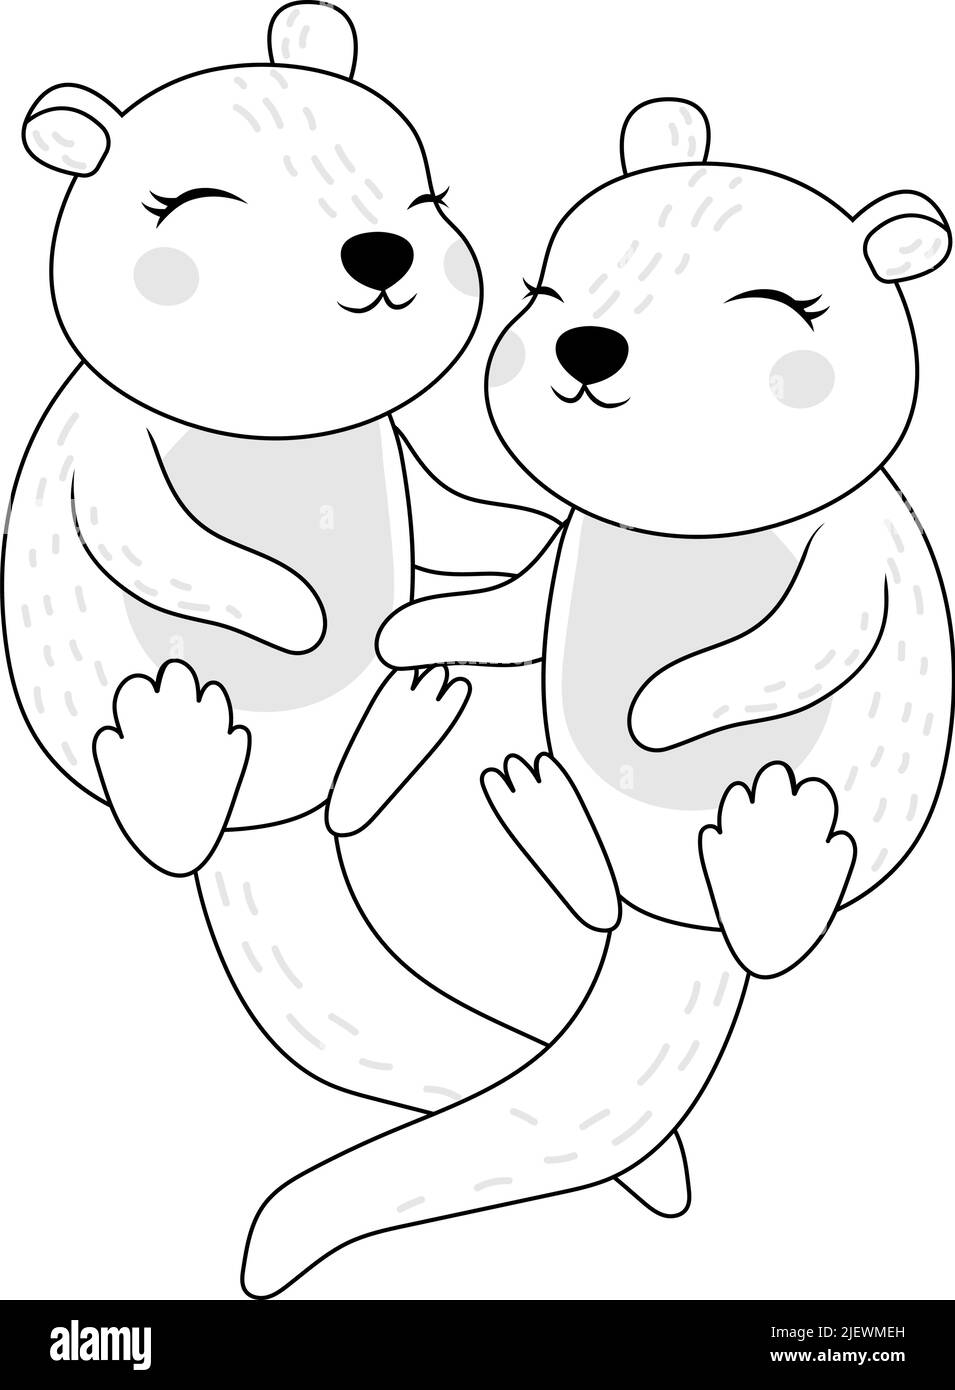 Clipart Otters Coloring Page in Cartoon Style. Cute Clip Art Two Otters Black and White. Vector Illustration of an Animal for Stickers, Baby Shower Stock Vector